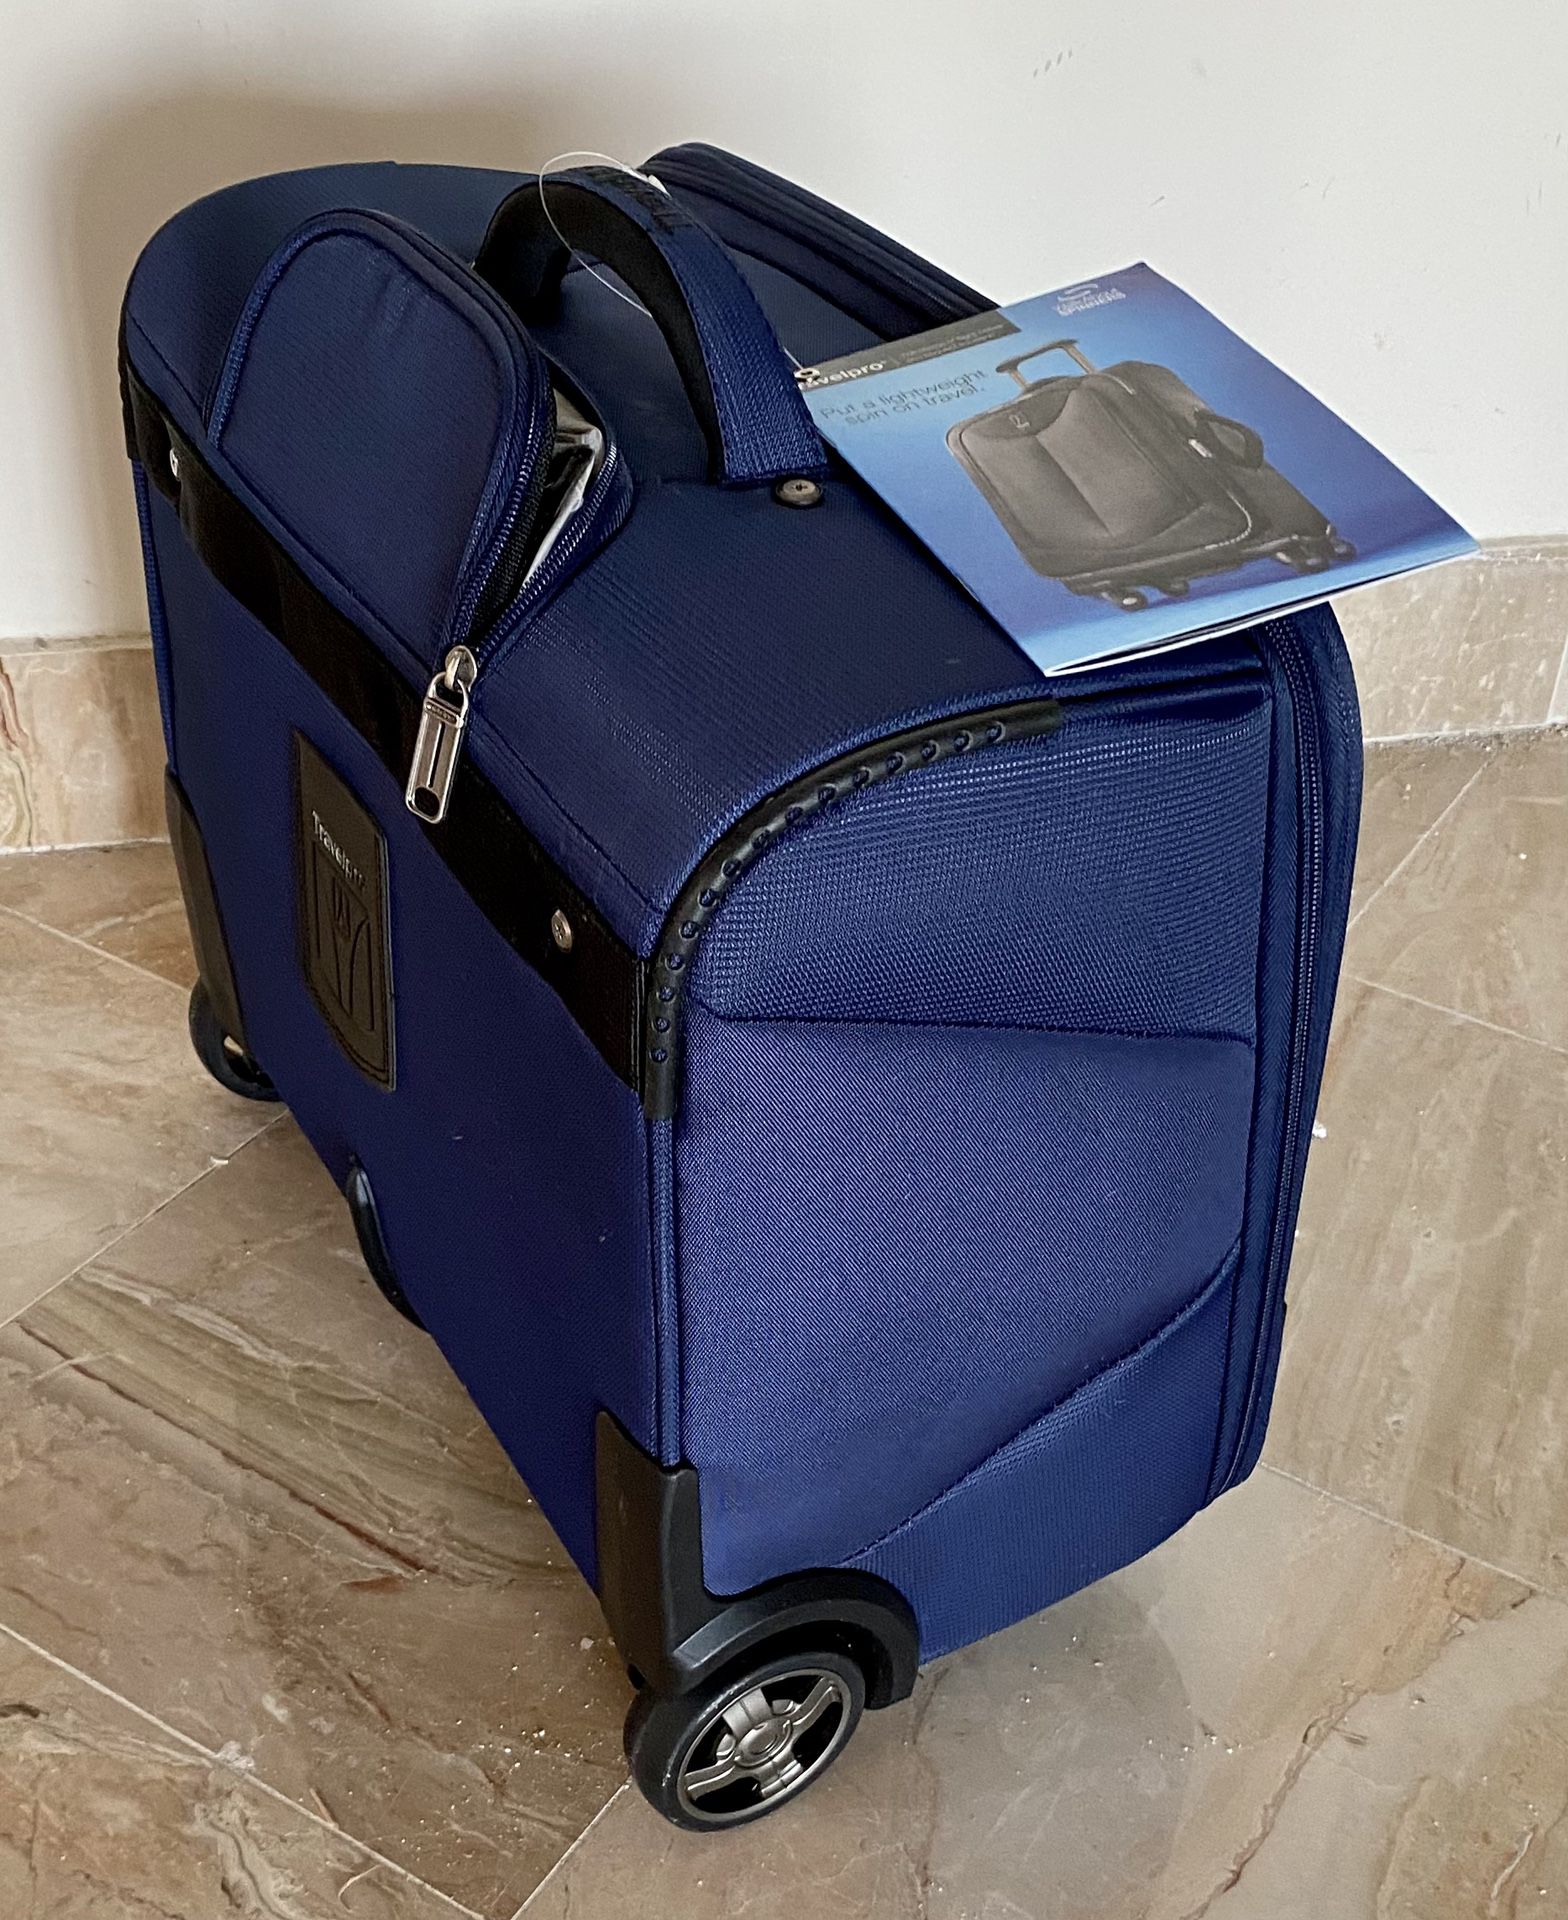 TravelPro Walkabout Spinner Rolling Tote